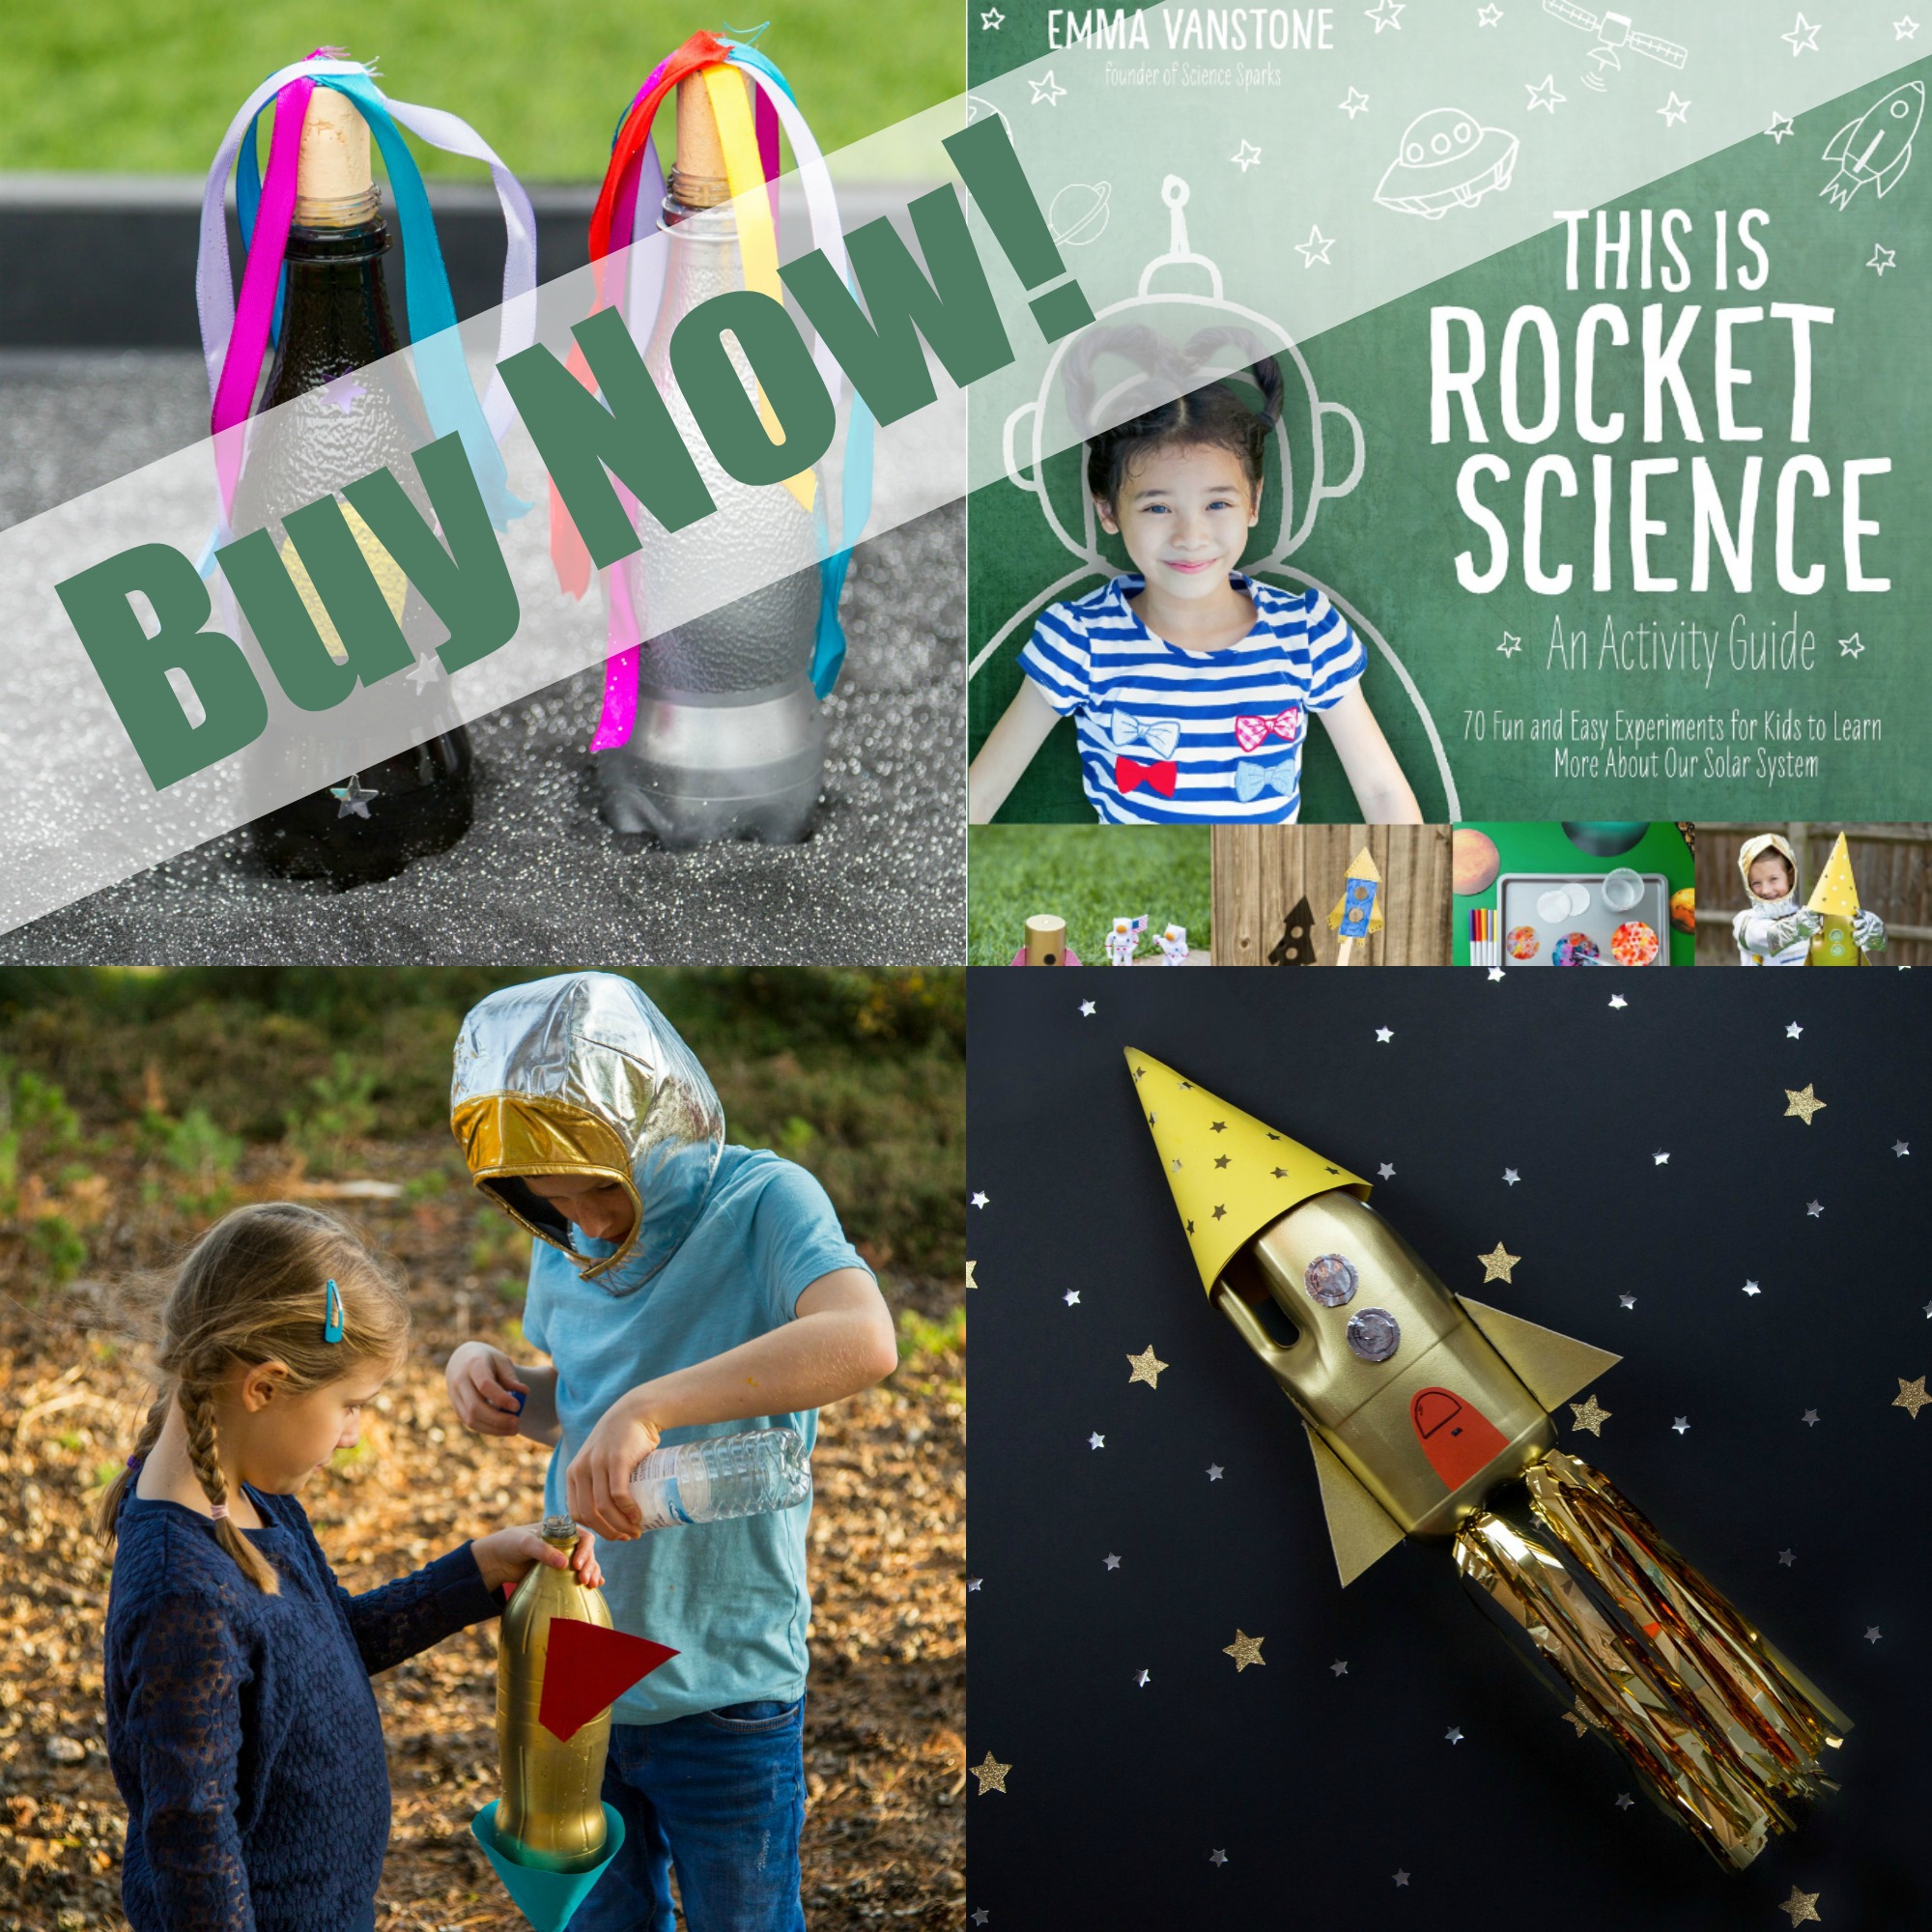 https://www.science-sparks.com/wp-content/uploads/2018/09/This-Is-Rocket-Science-Collage-Buy-Now.jpg